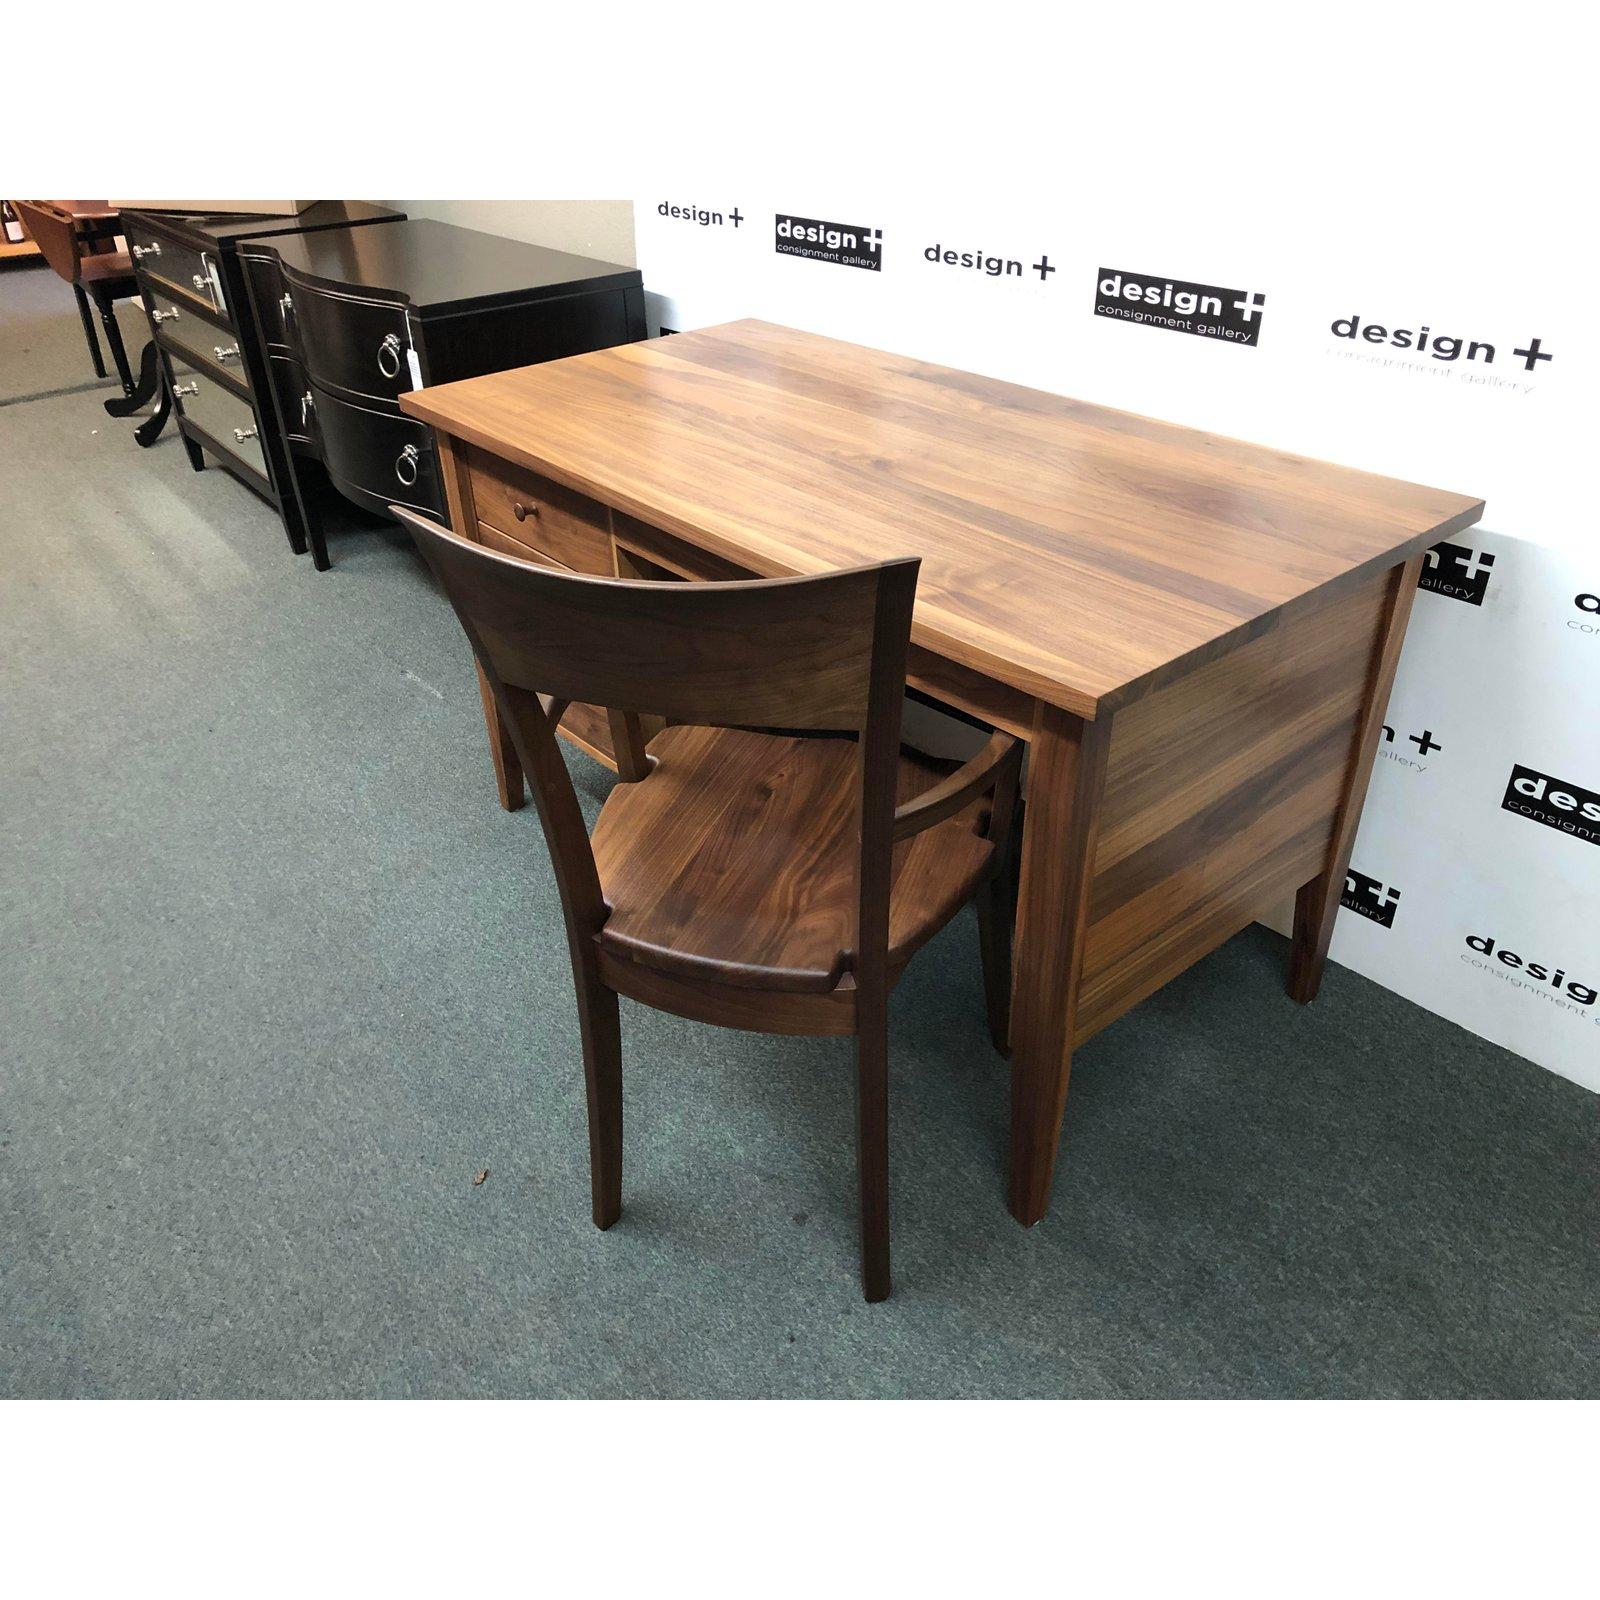 A custom executive desk by Vermont Woods Studio. Handcrafted of solid American black walnut, this Classic shaker beauty is a joy to behold and built to enjoy for generations. All drawers except the pencil drawer have full extension glides. The